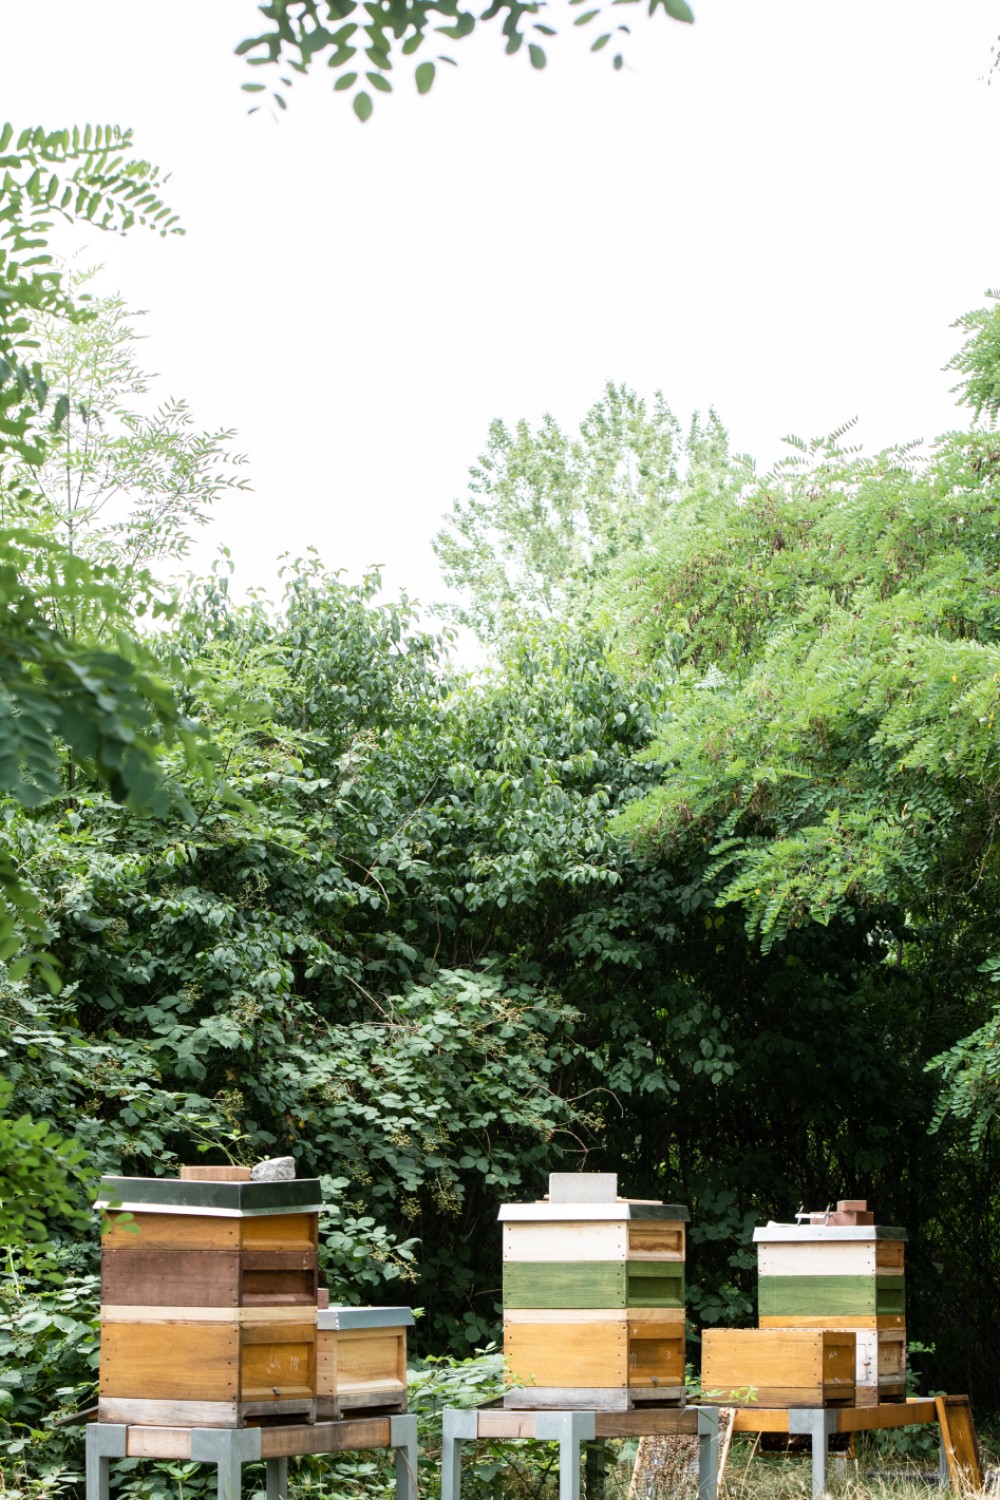 Beehives in a meadow surrounded by trees